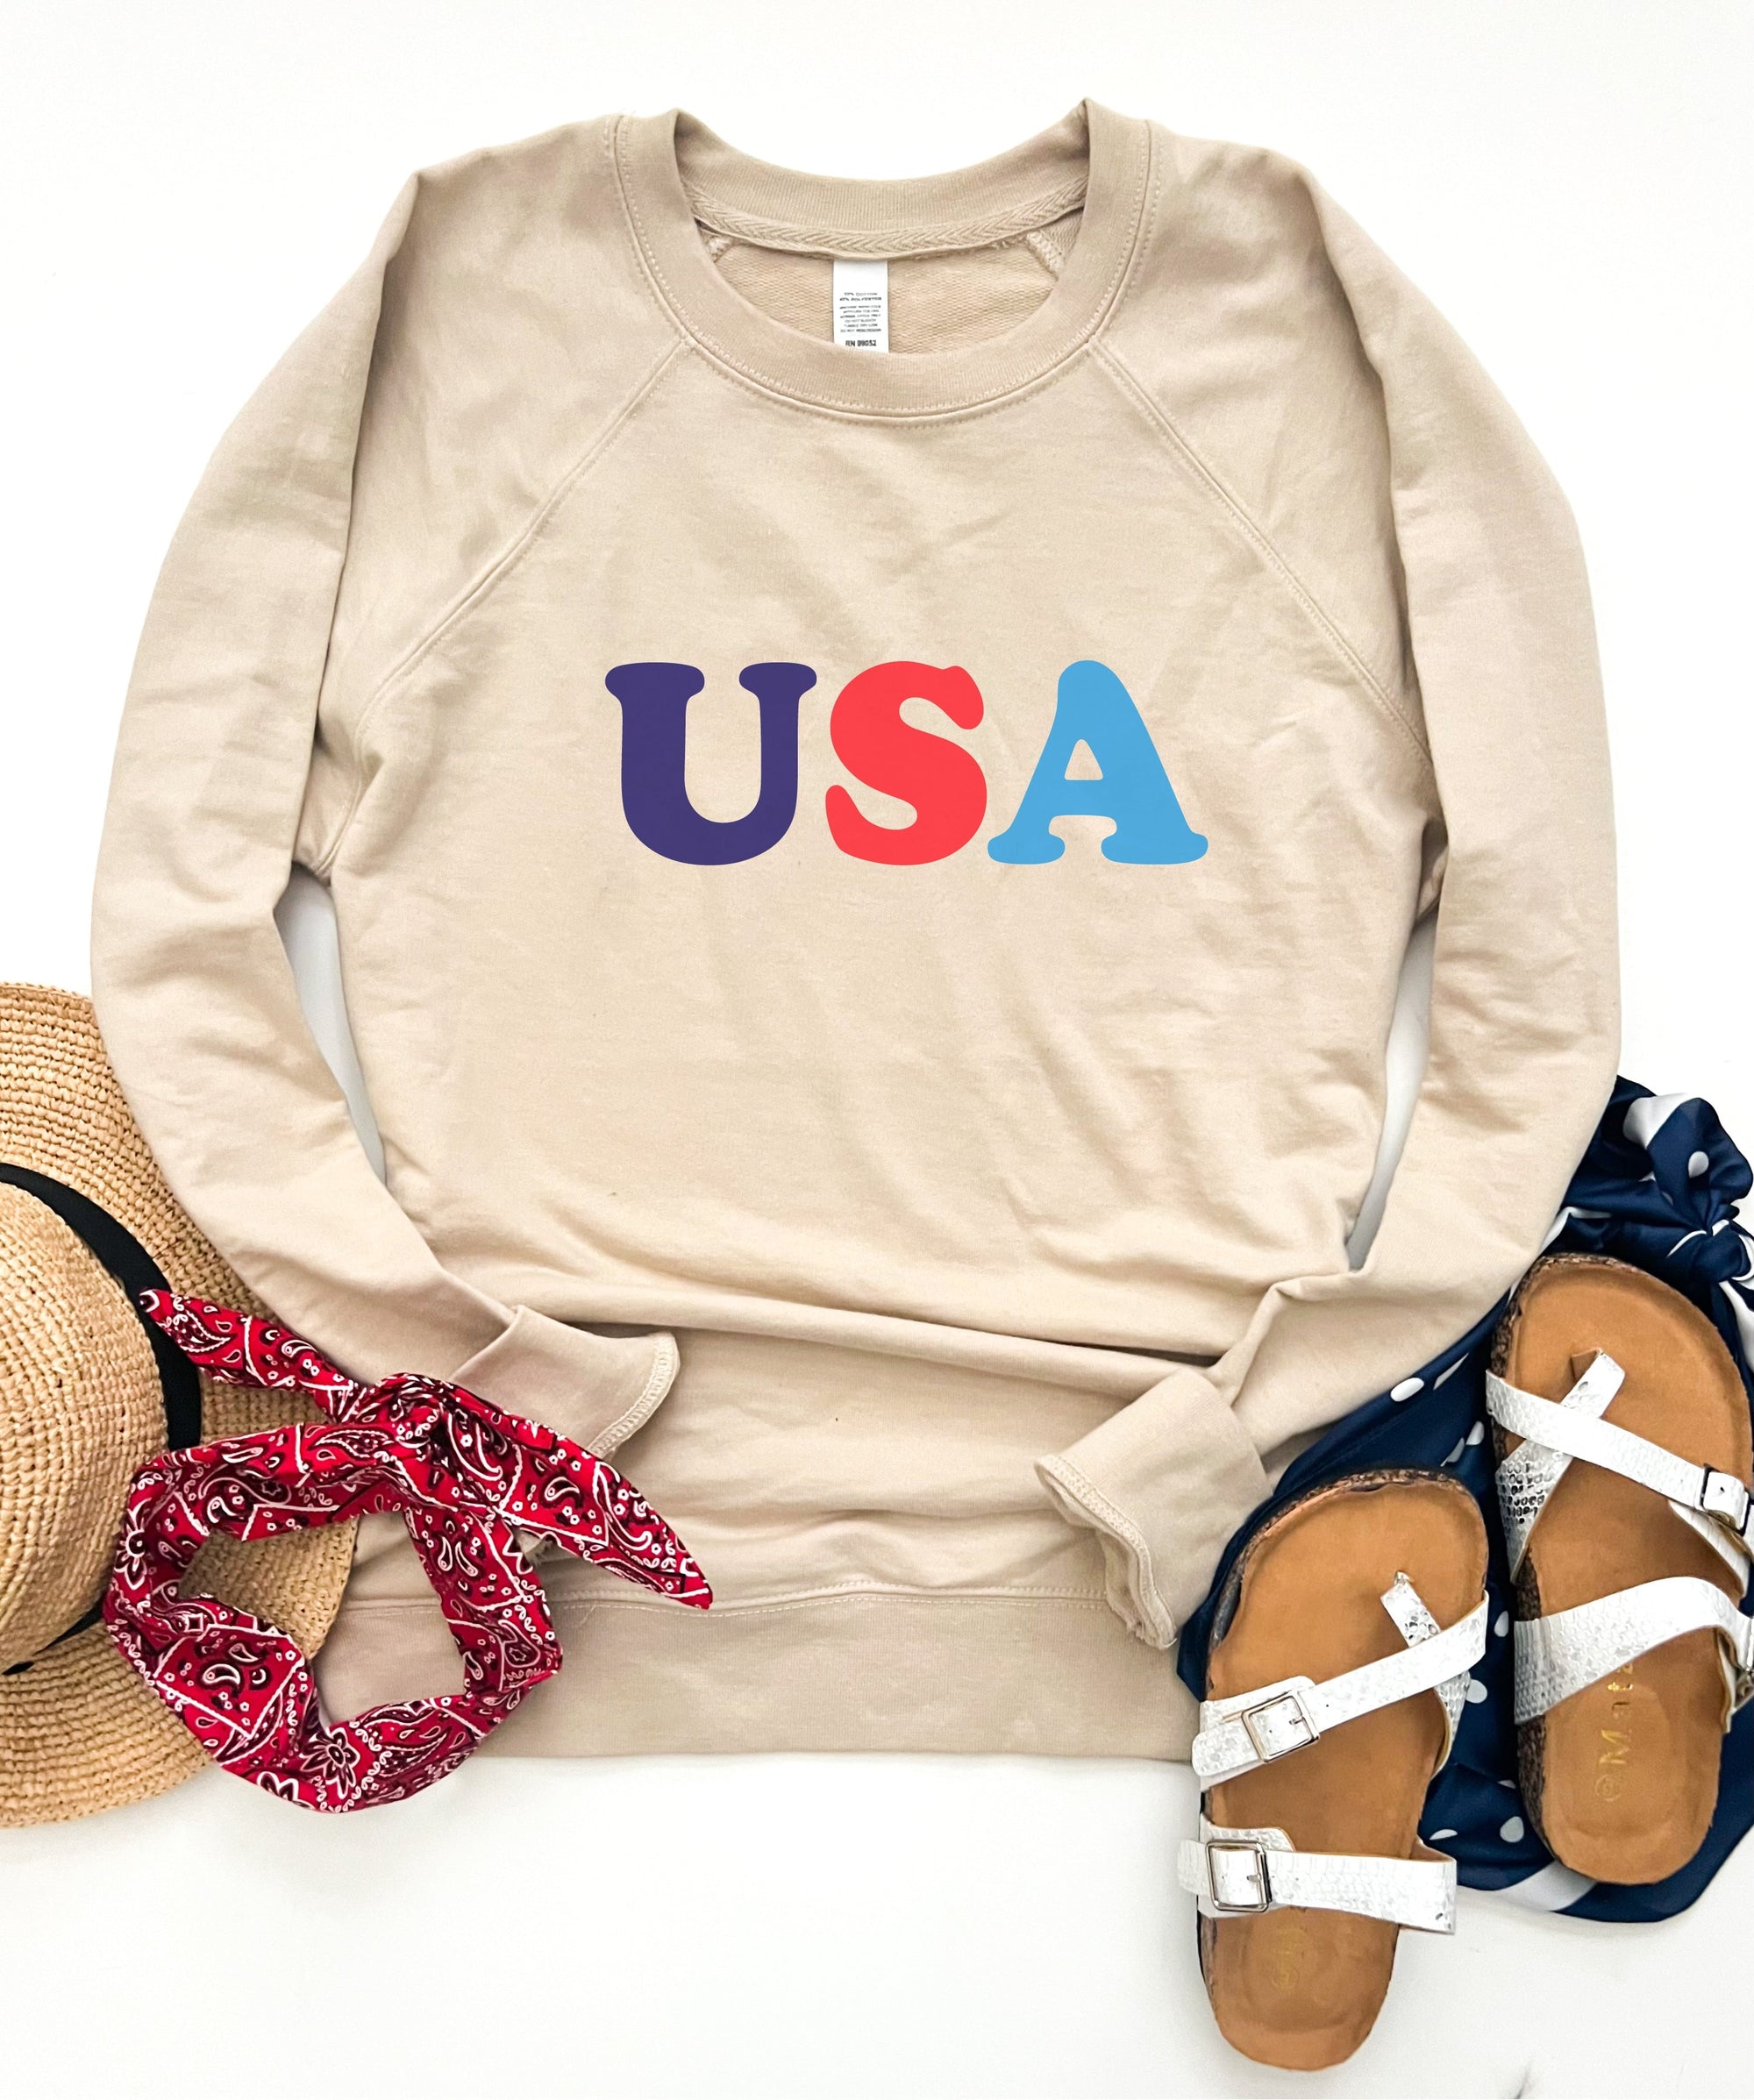 USA multi french terry sweatshirt 4th of july collection Independent Trading Co French Terry 